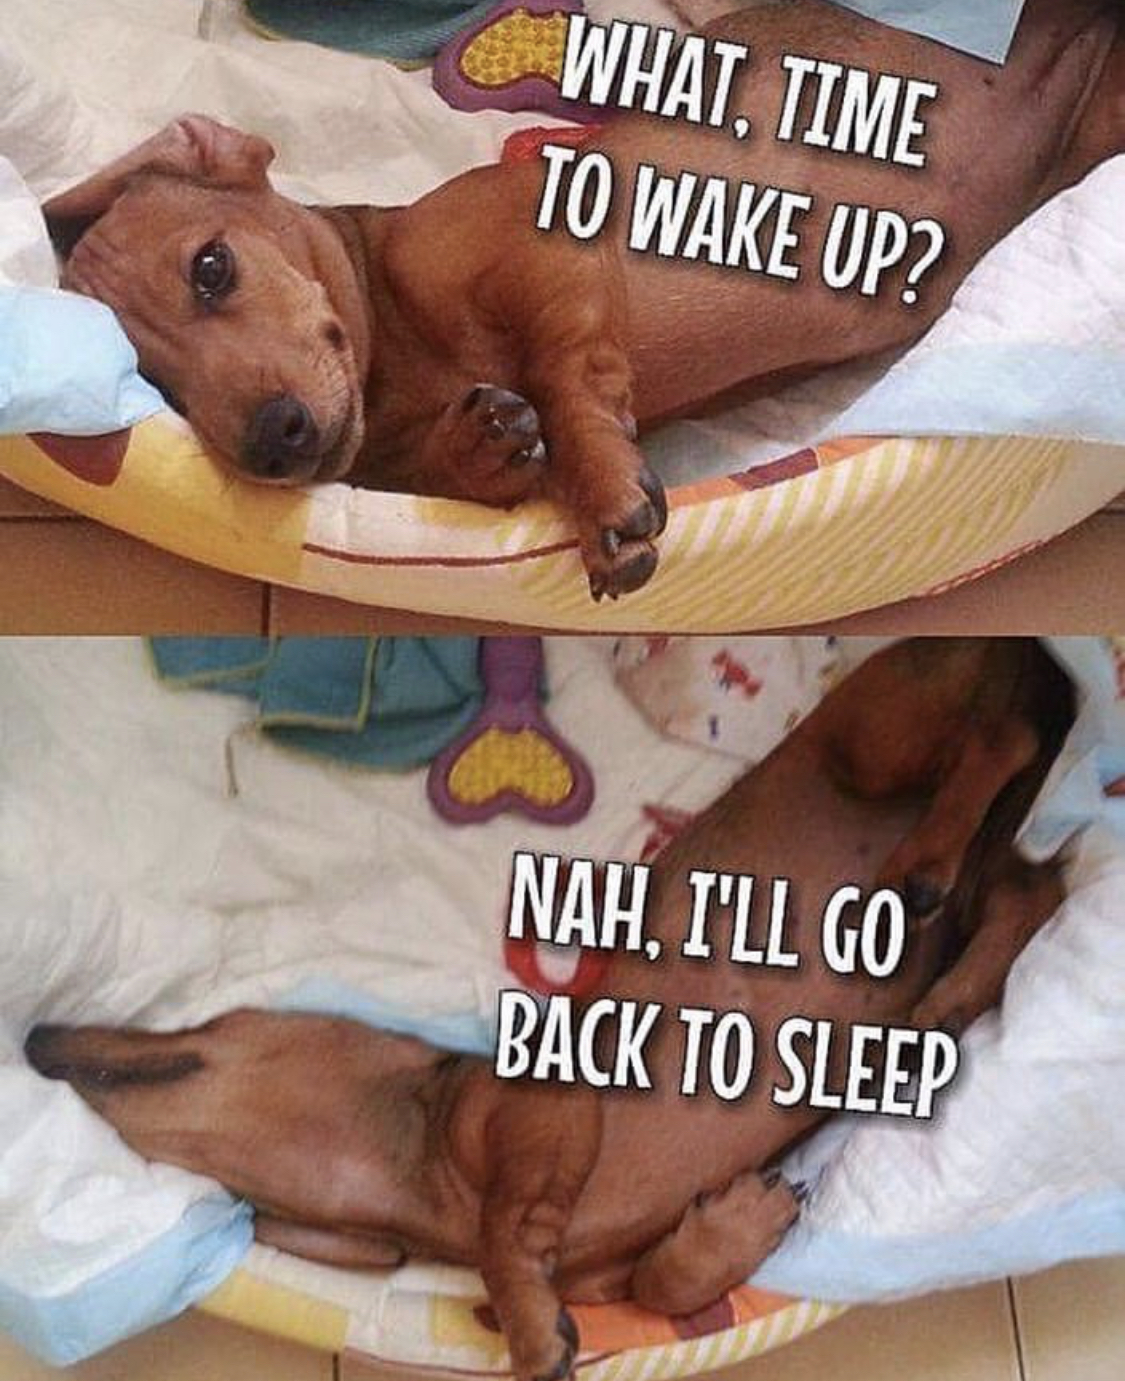 A lazy Dachshund lying on its bed photo with text - What time to wake up? Nah, I'll go back to sleep